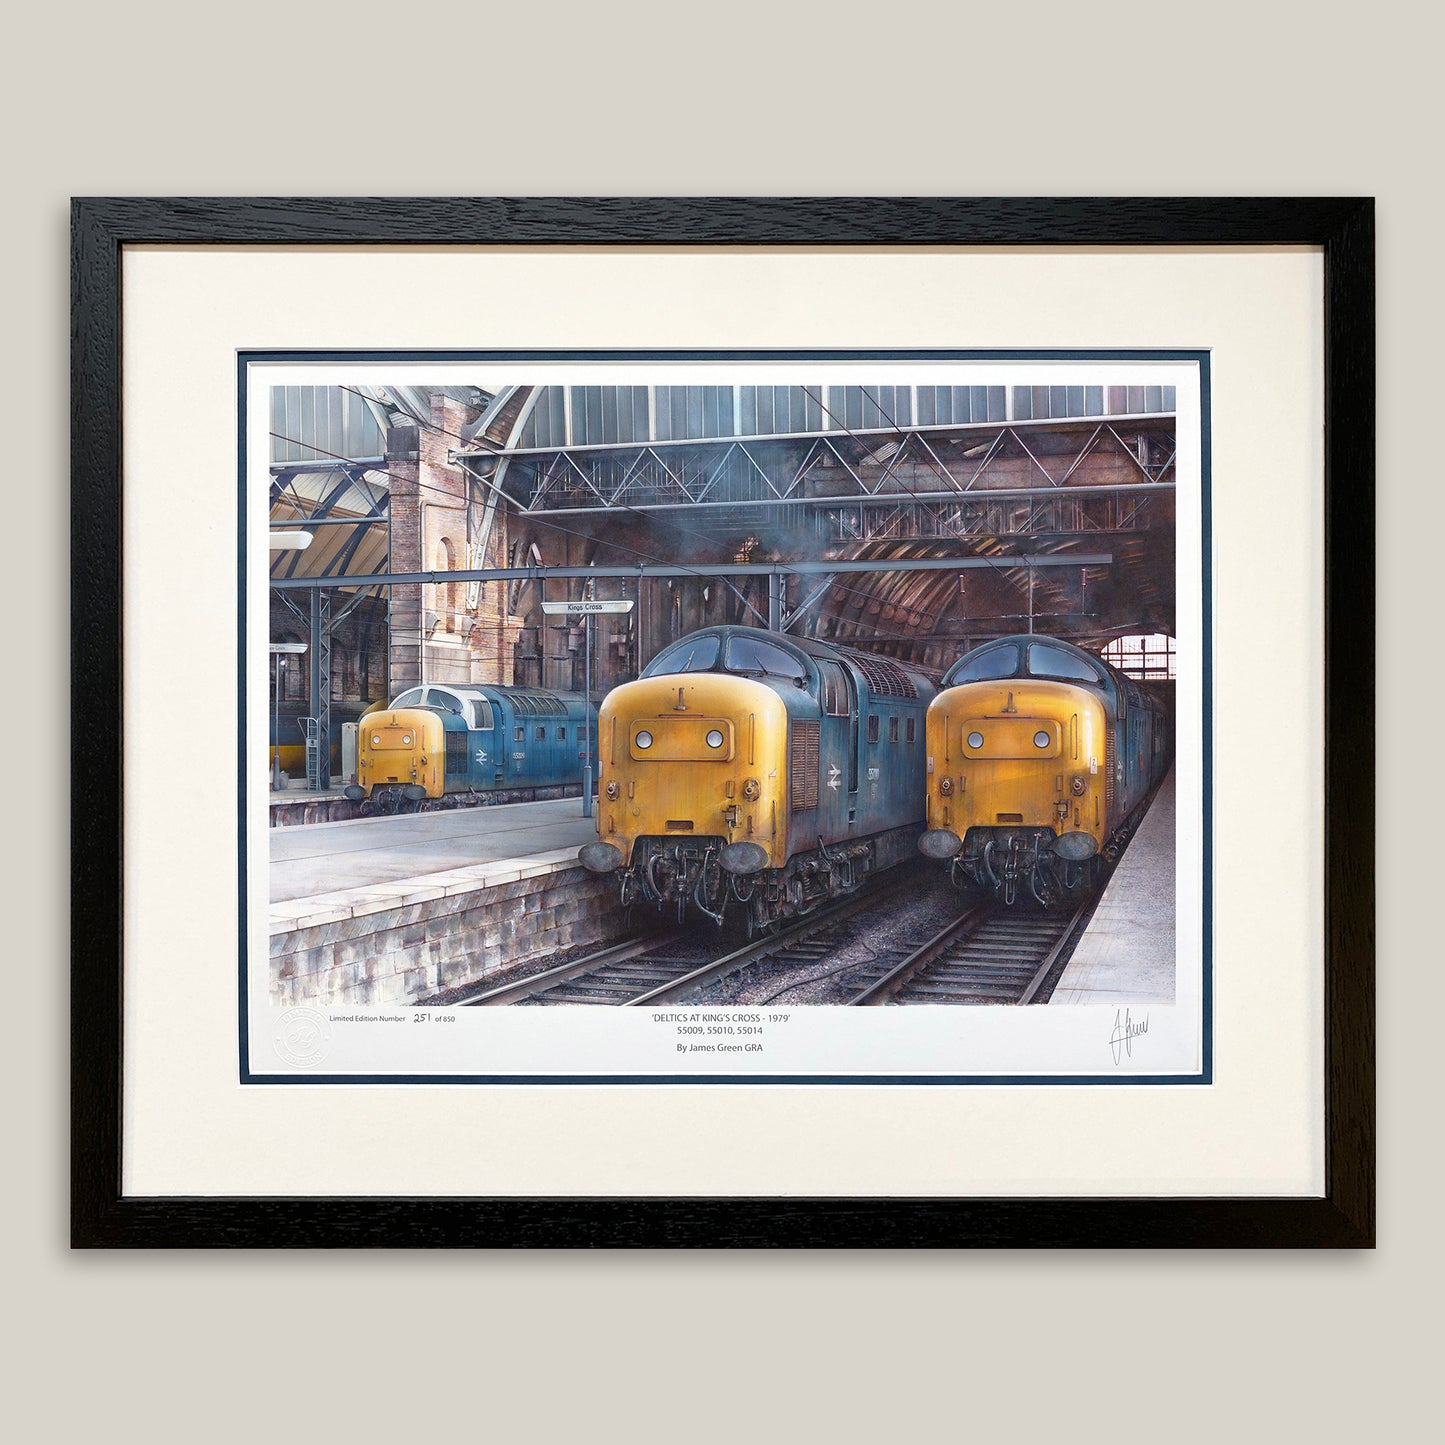 framed print of 3 deltics 55009 Alycidon  with a white cab, the middle deltic  55010 The King's Own Scottish Borderer and on the right of the painting is 55014 The Duke of Wellington's Regiment